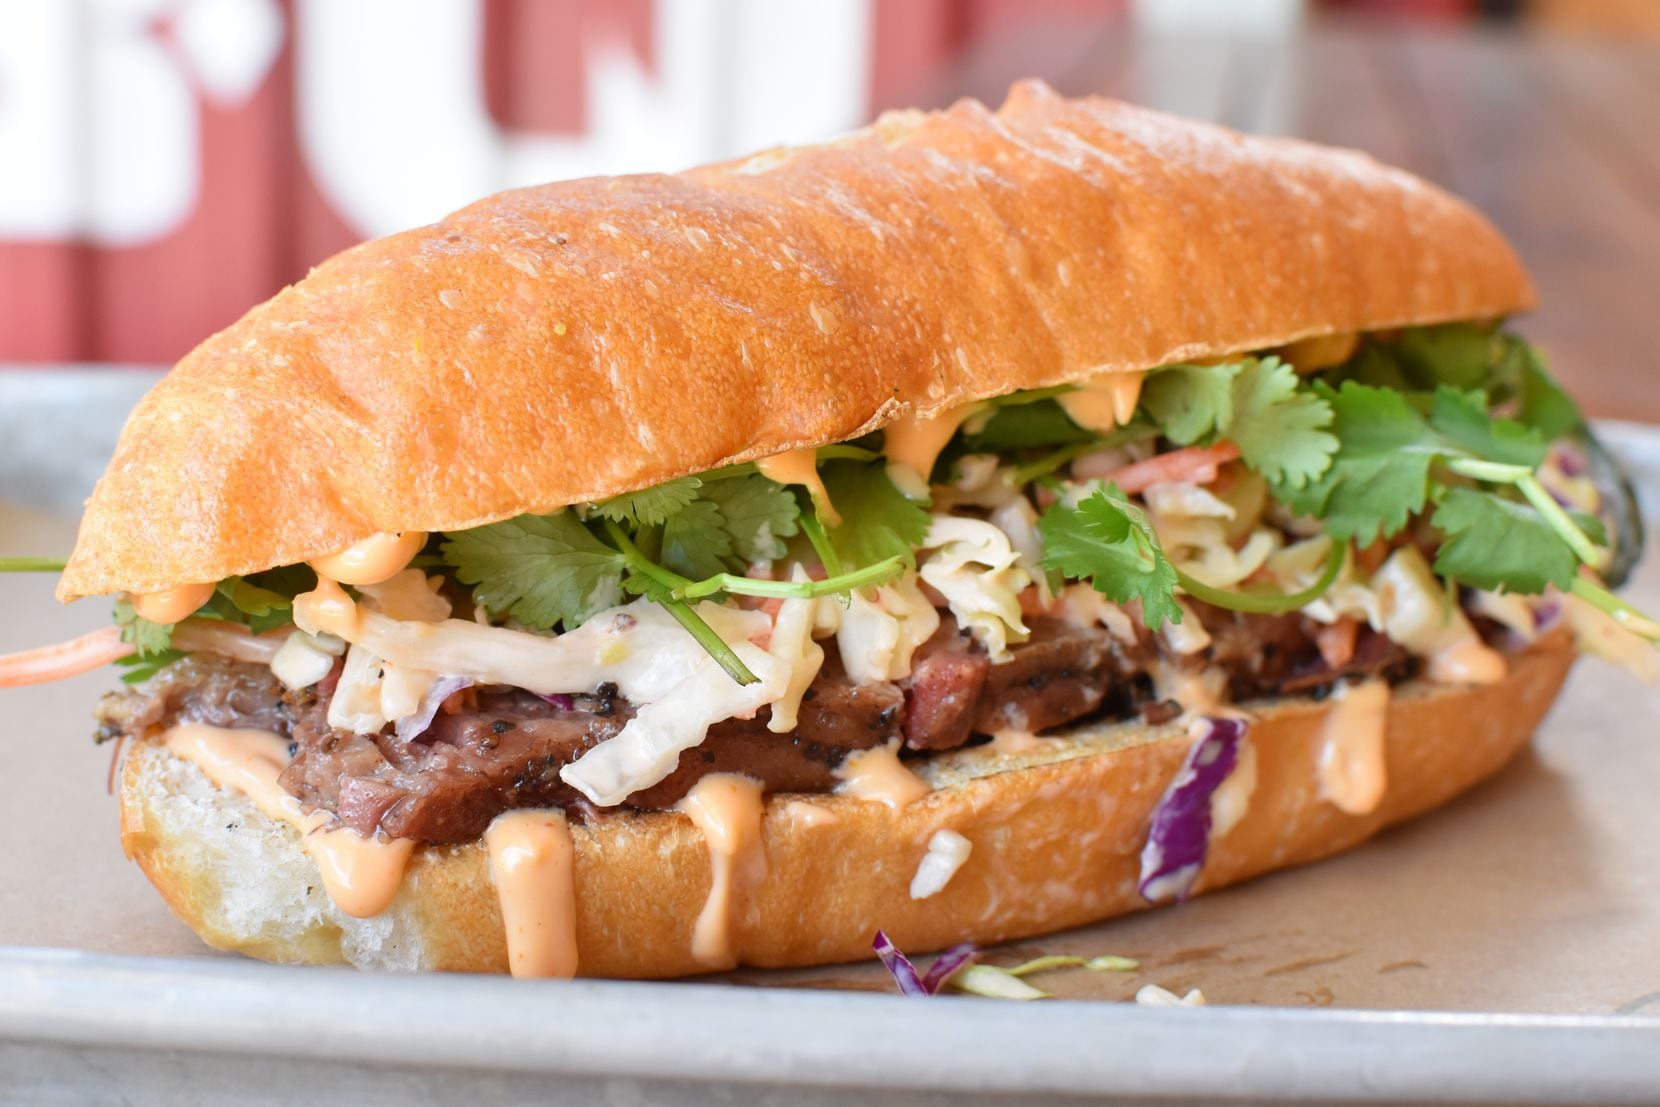 Some of the sandwiches at Brisket Love BBQ don't look like traditional Central Texas barbecue. The brisket banh mi comes on a hoagie, with cilantro and barbecue mayo. 